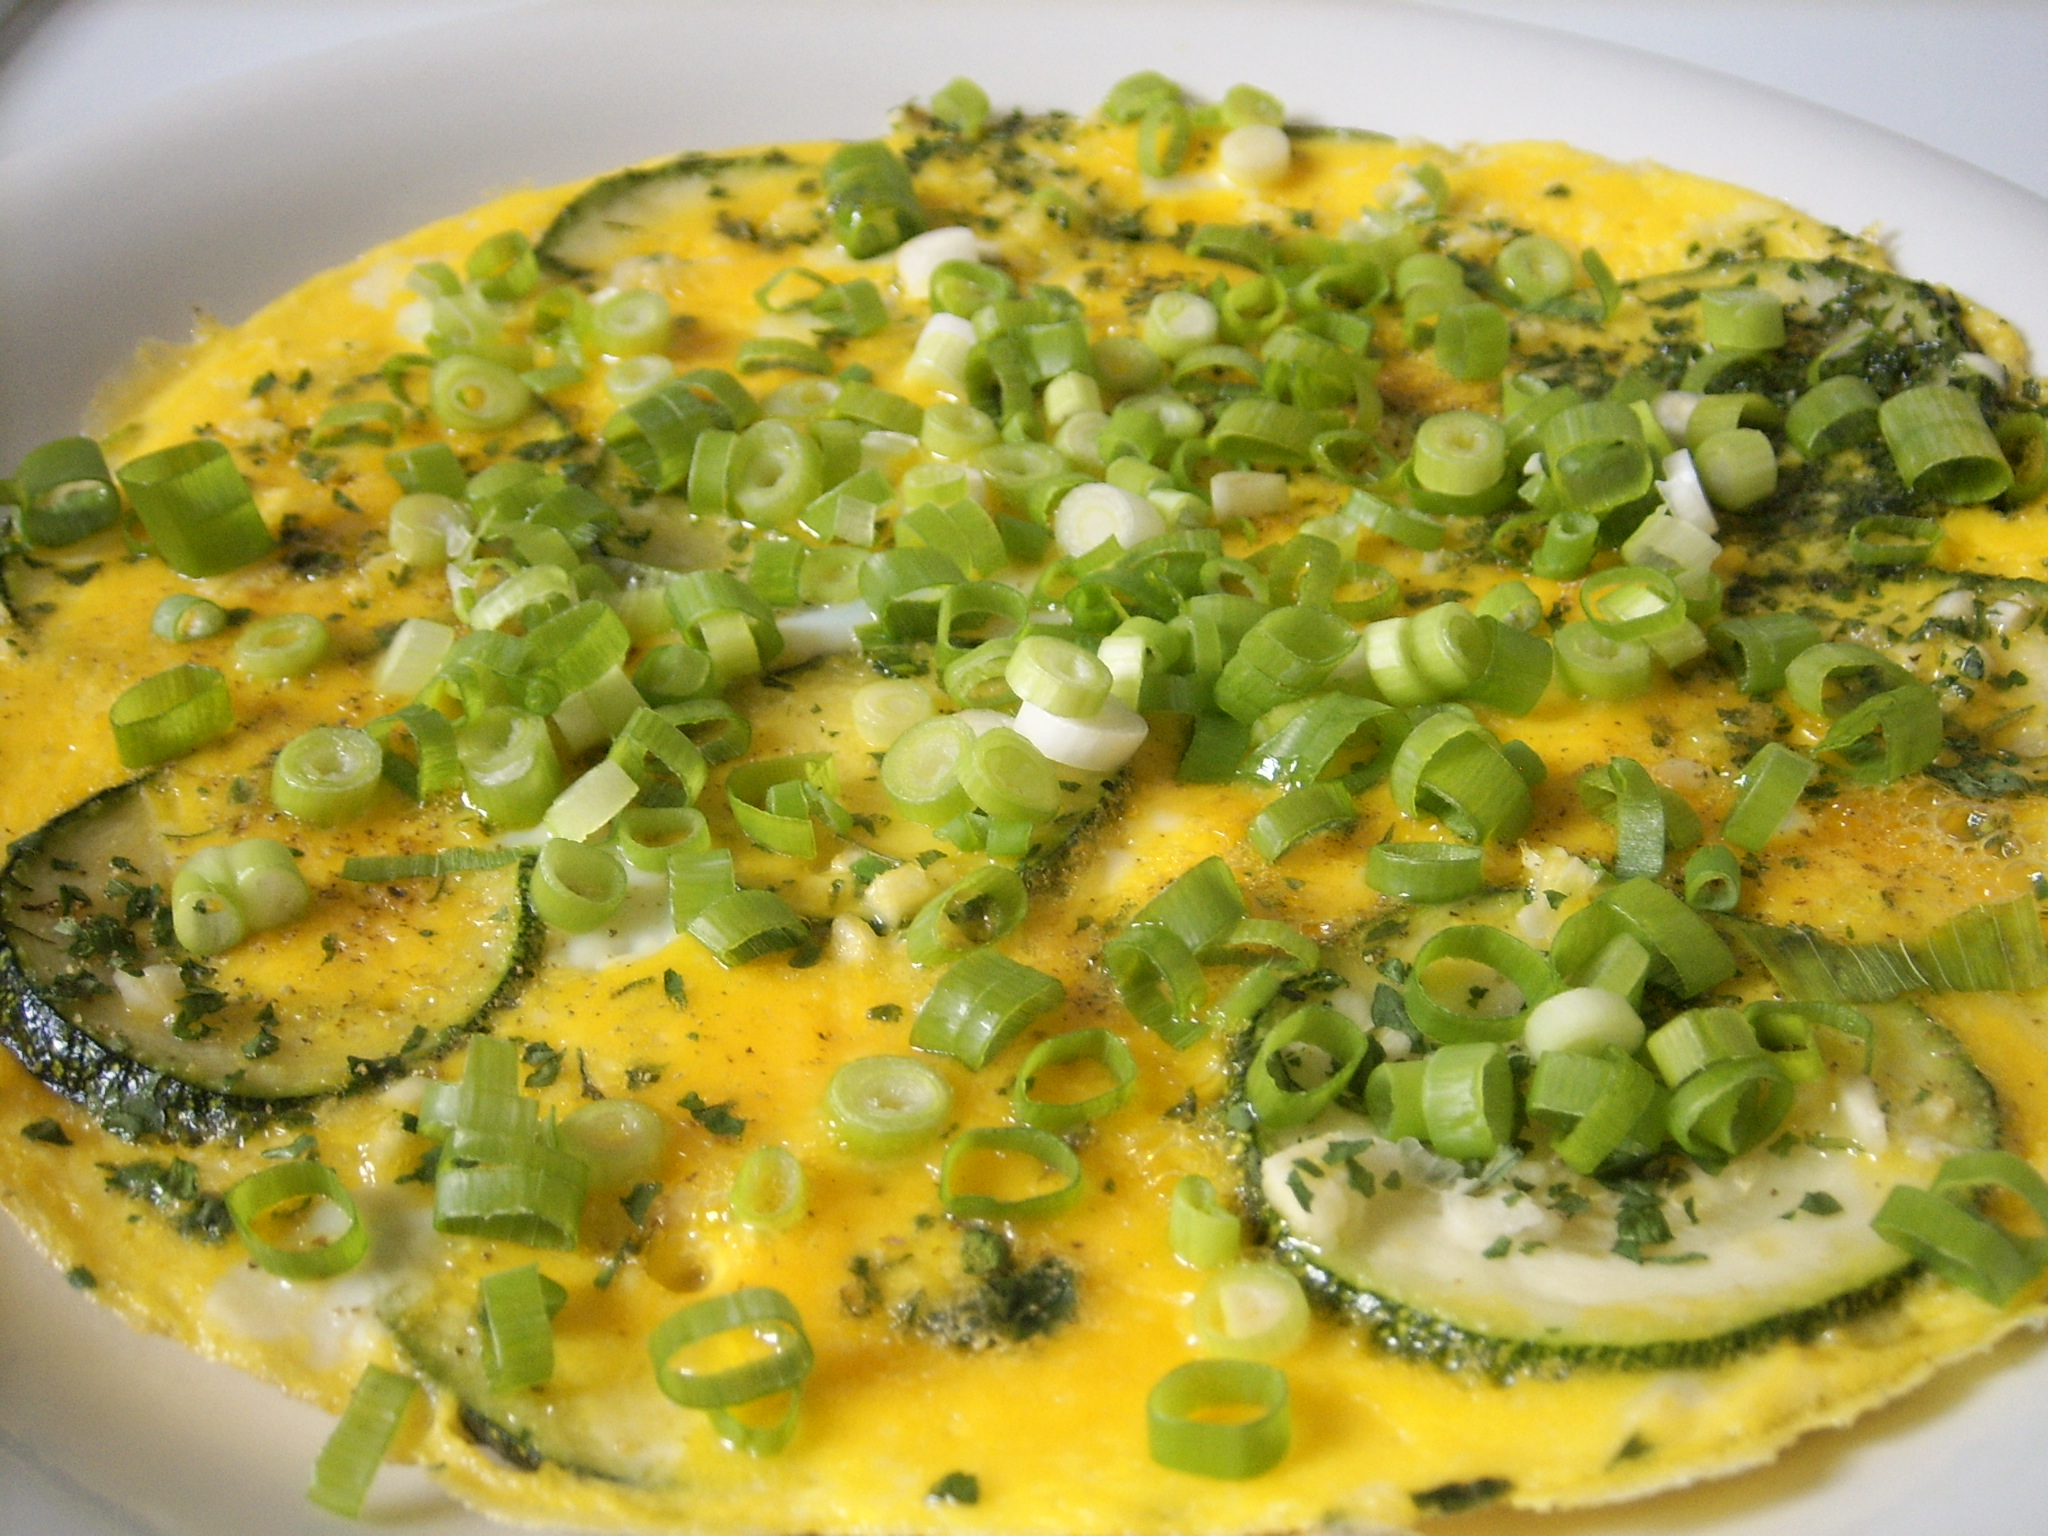 Courgette omelet